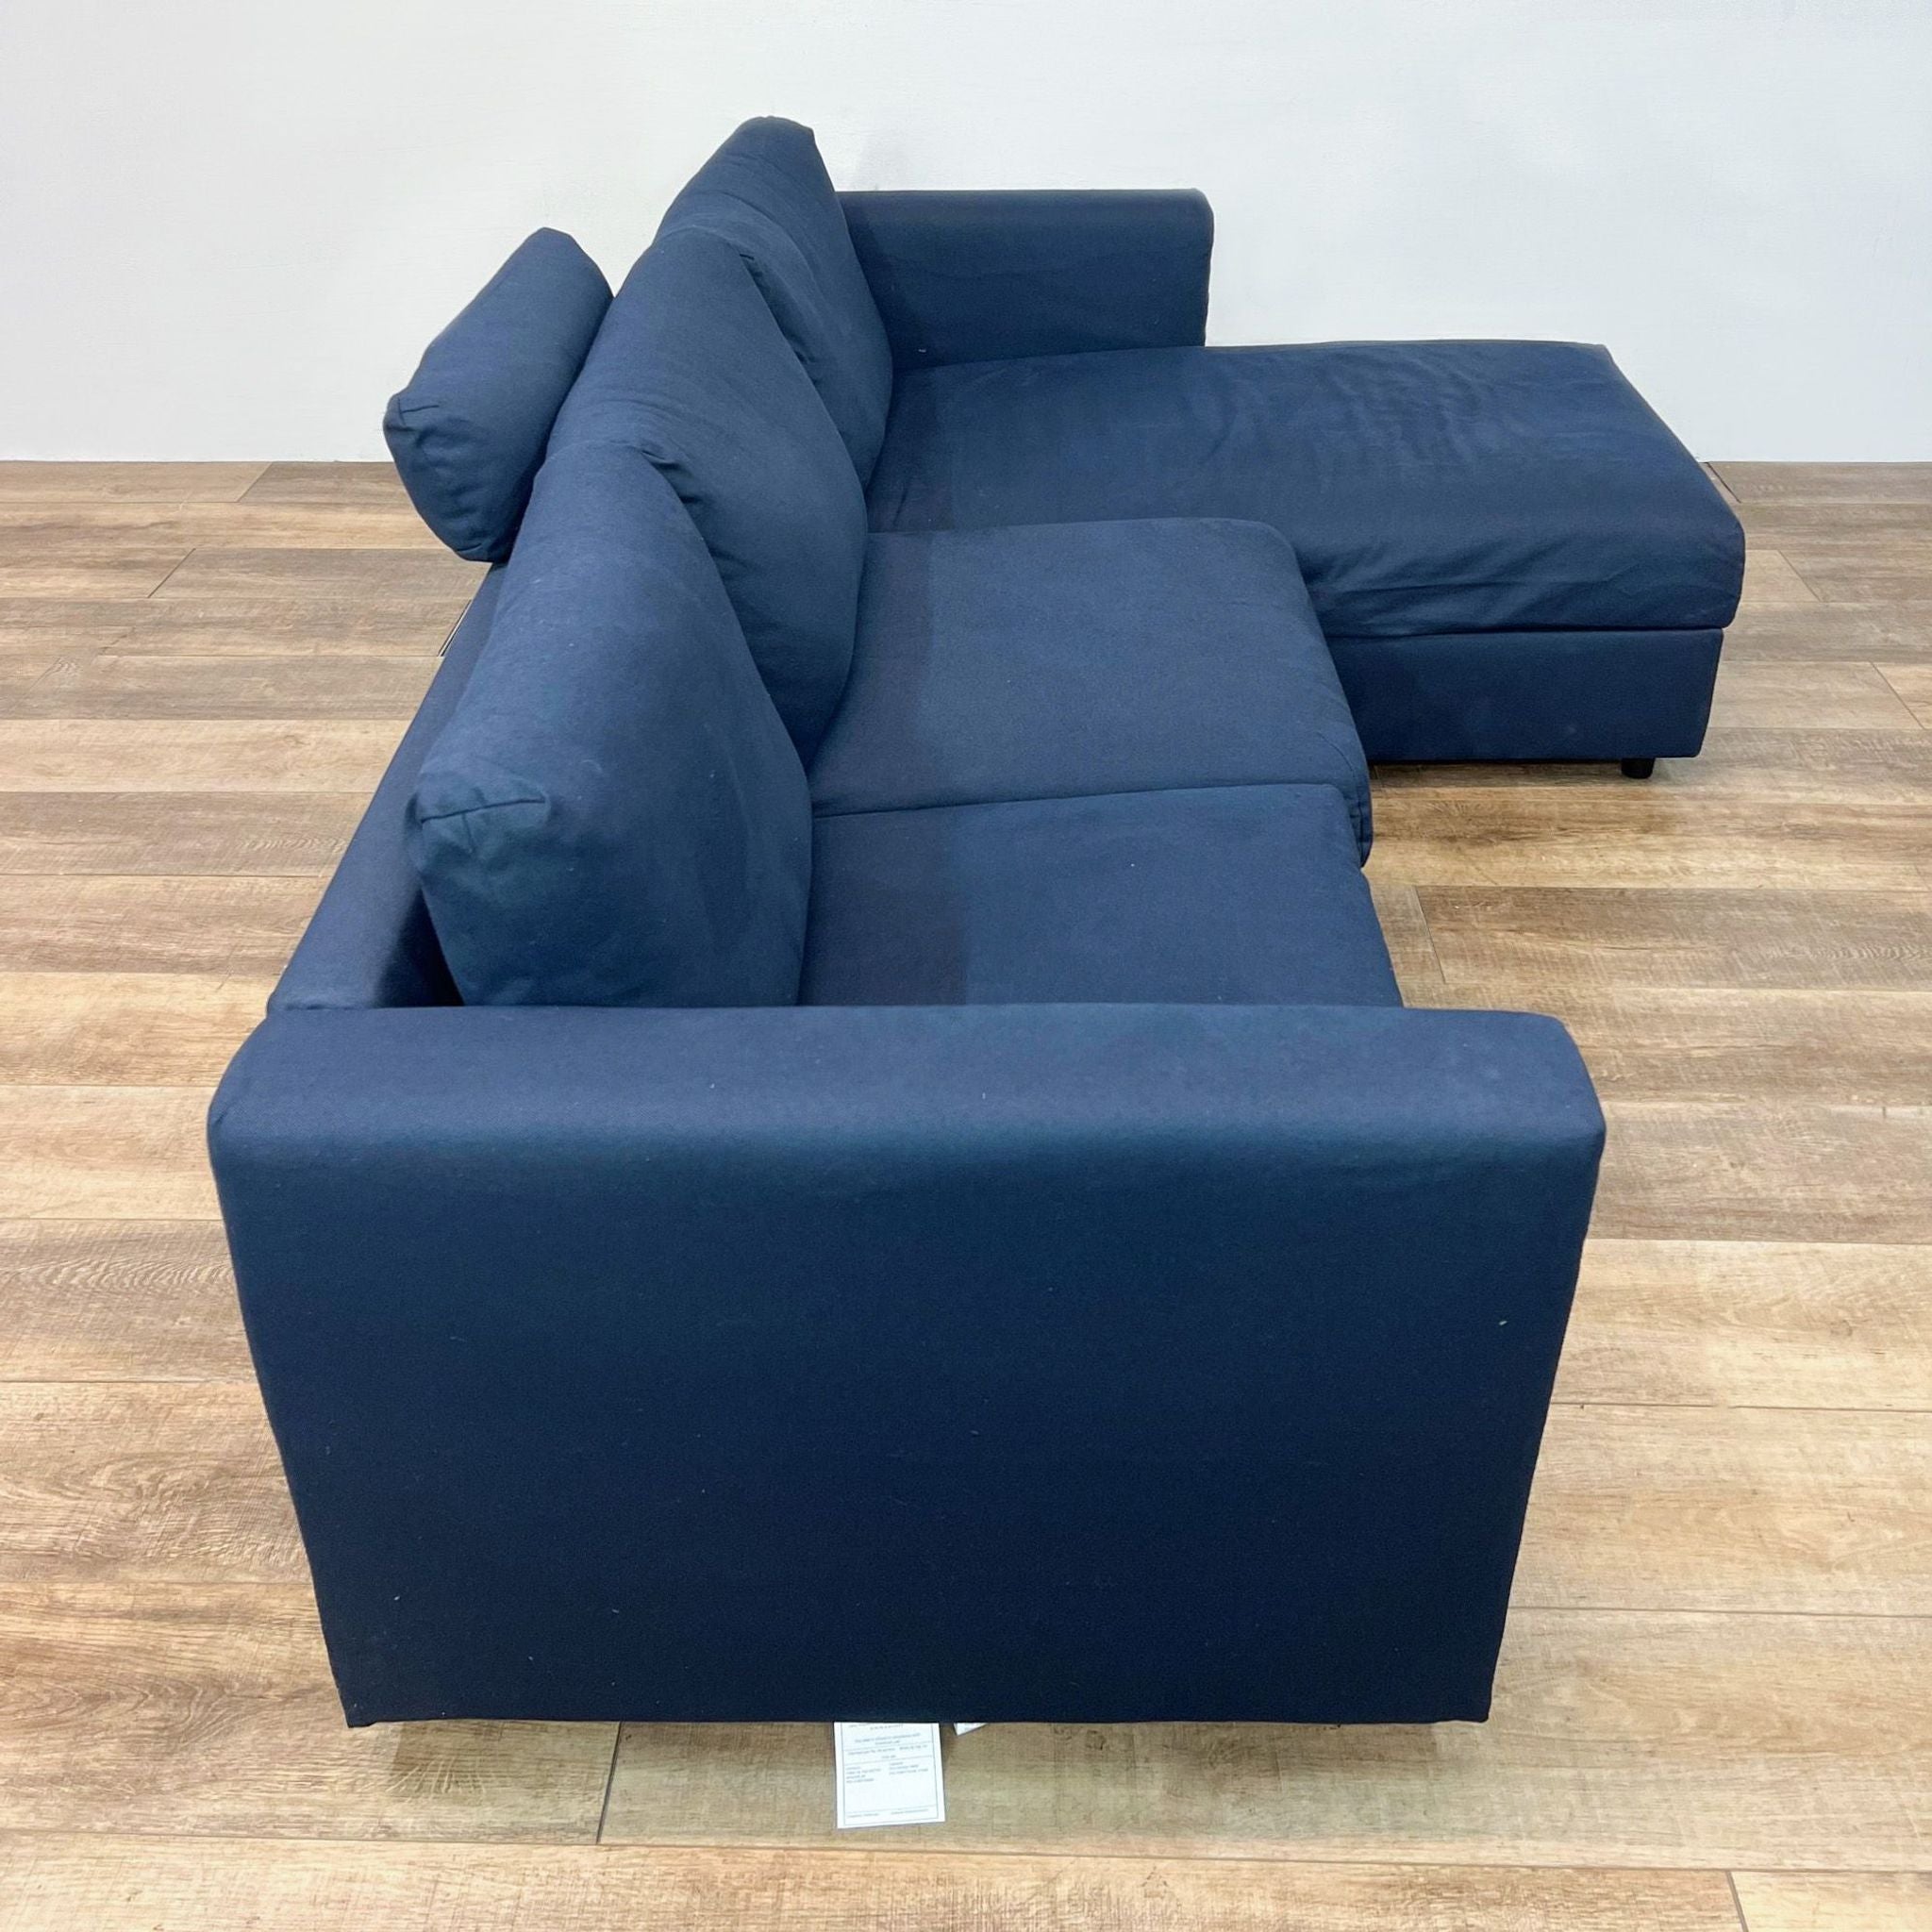 Front angle view of a blue Ikea sectional sofa with a chaise lounge, demonstrating the piece's sleek and contemporary style.